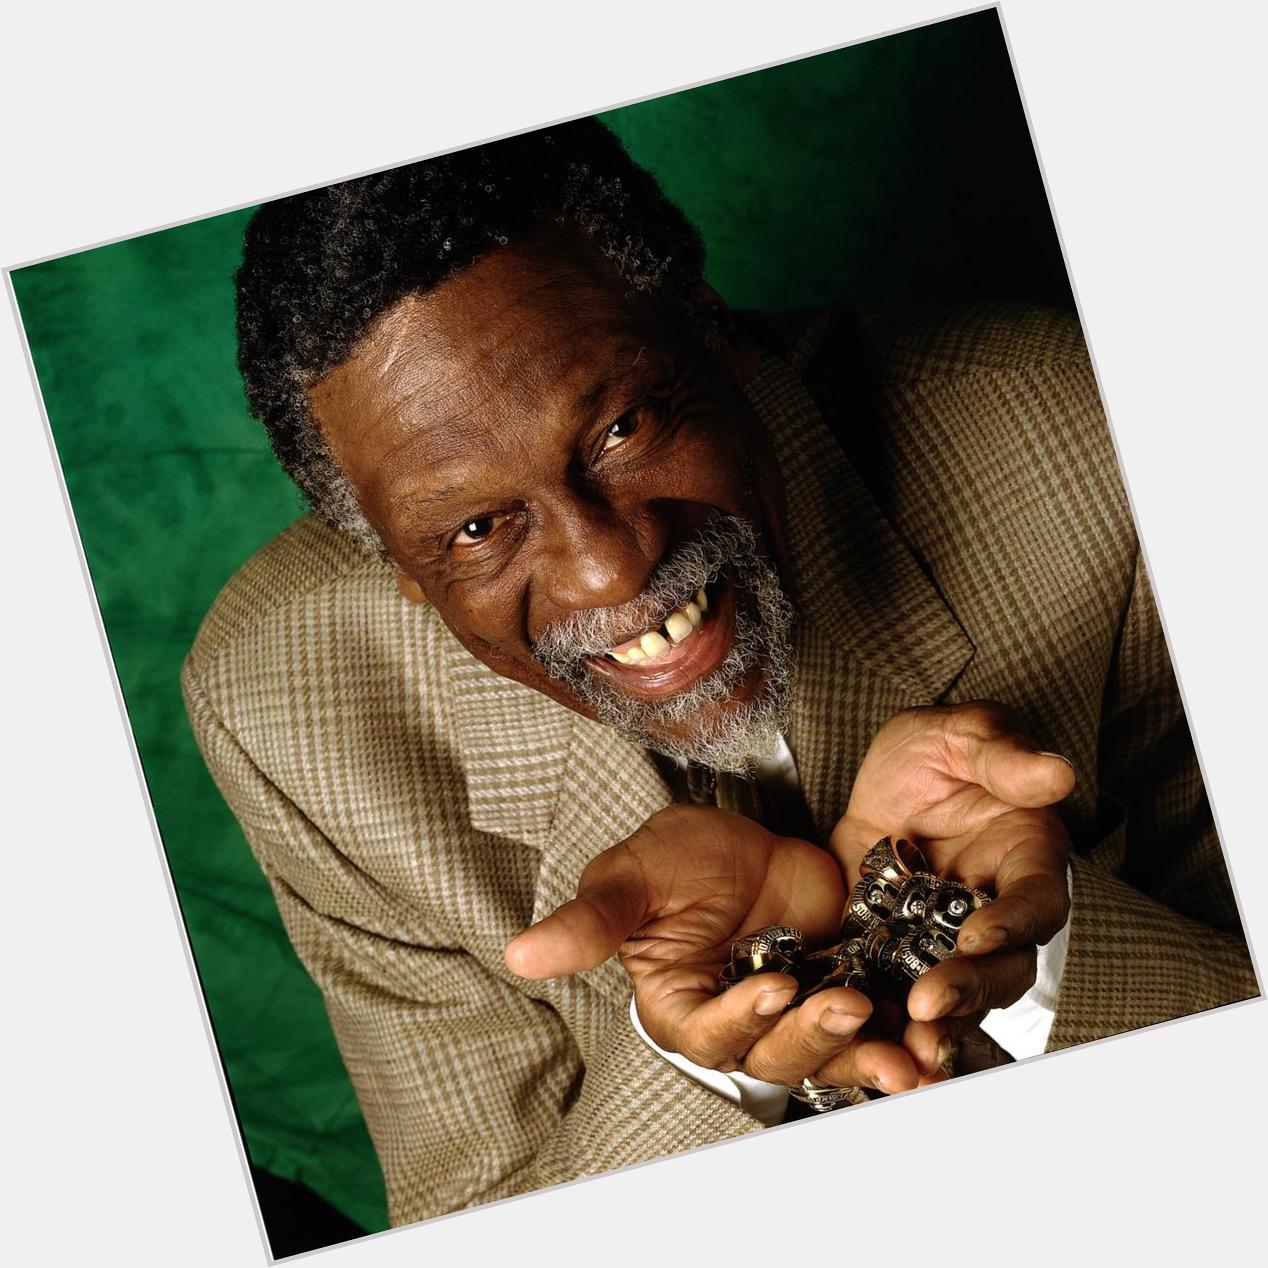 Join us in wishing Bill Russell a very Happy 81st Birthday! 